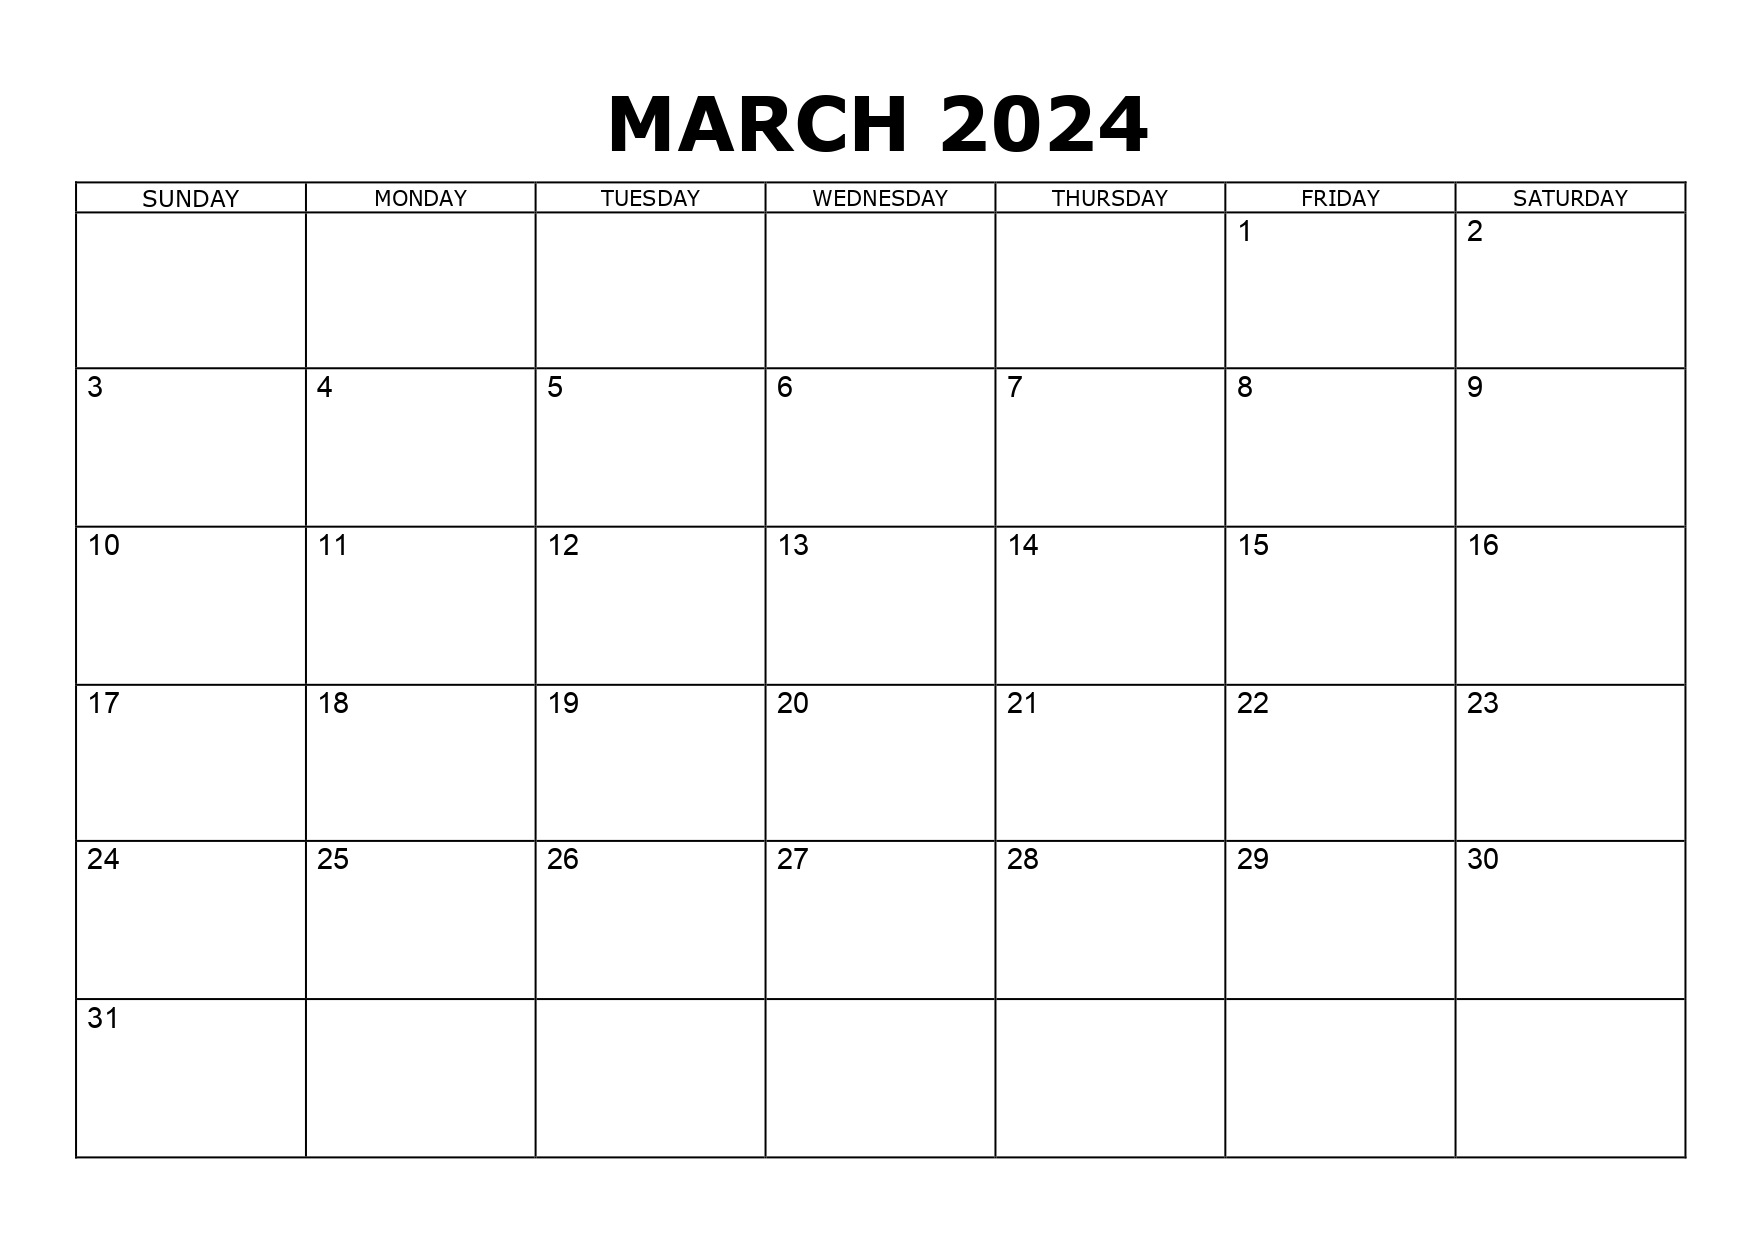 Free Cute March Calendar Printable 2024: JPG for Printing, PDF for Download!